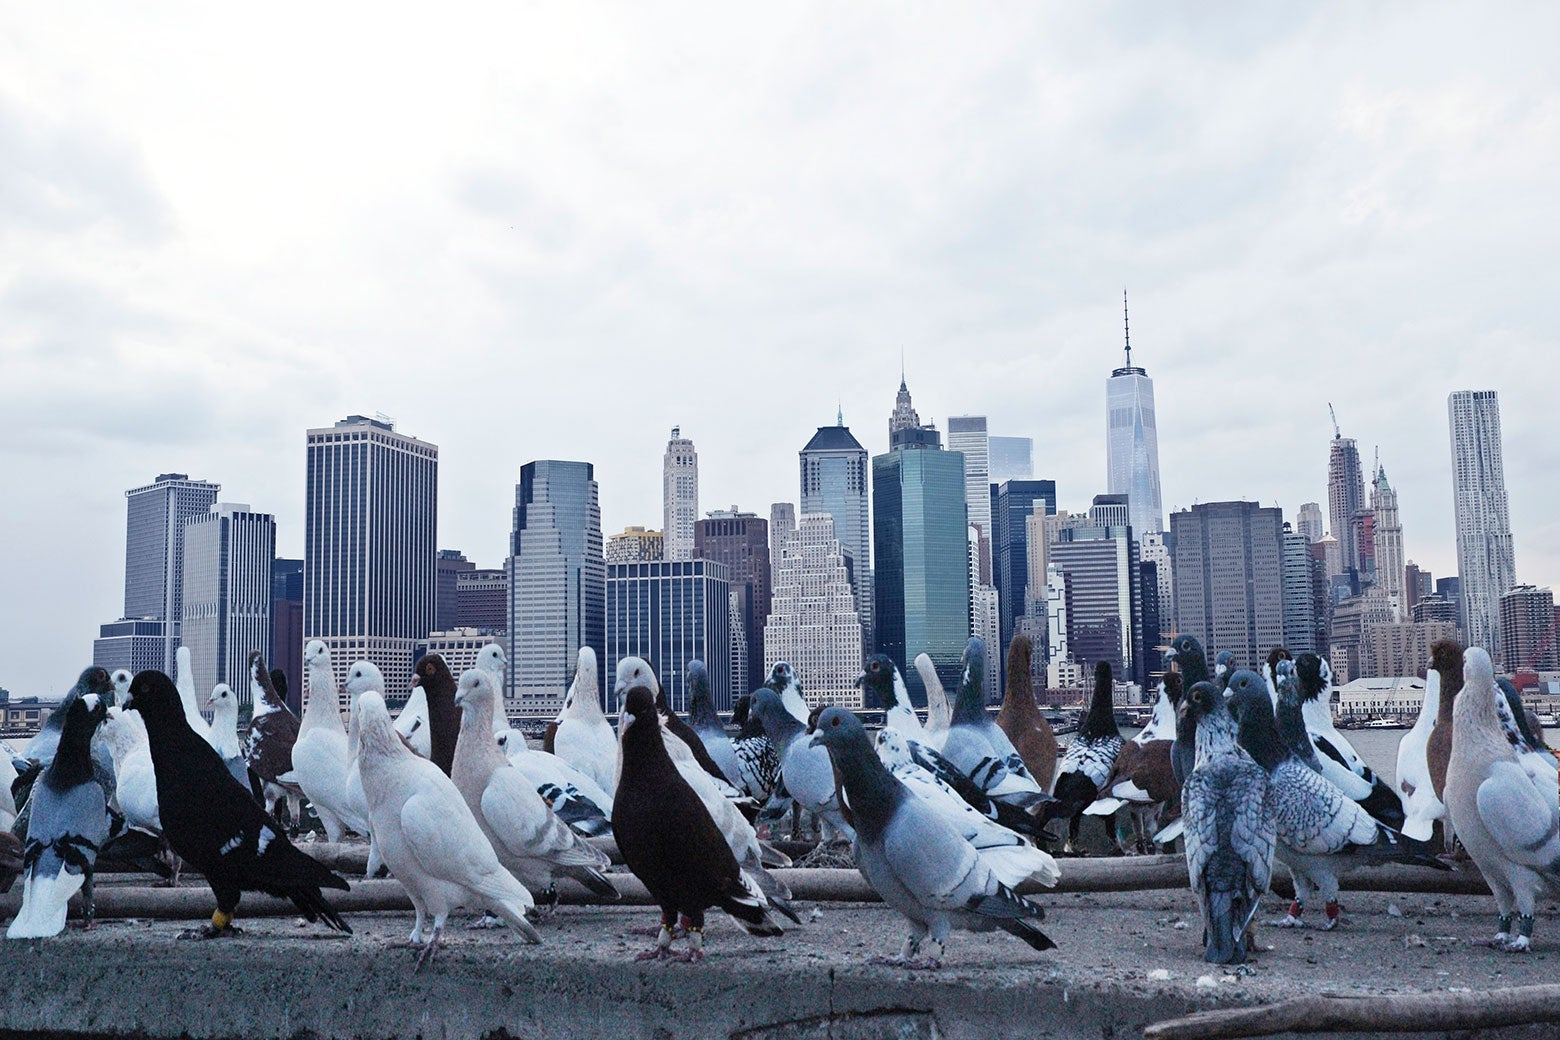 Group of pigeons on concrete, with downtown New York skyline in background